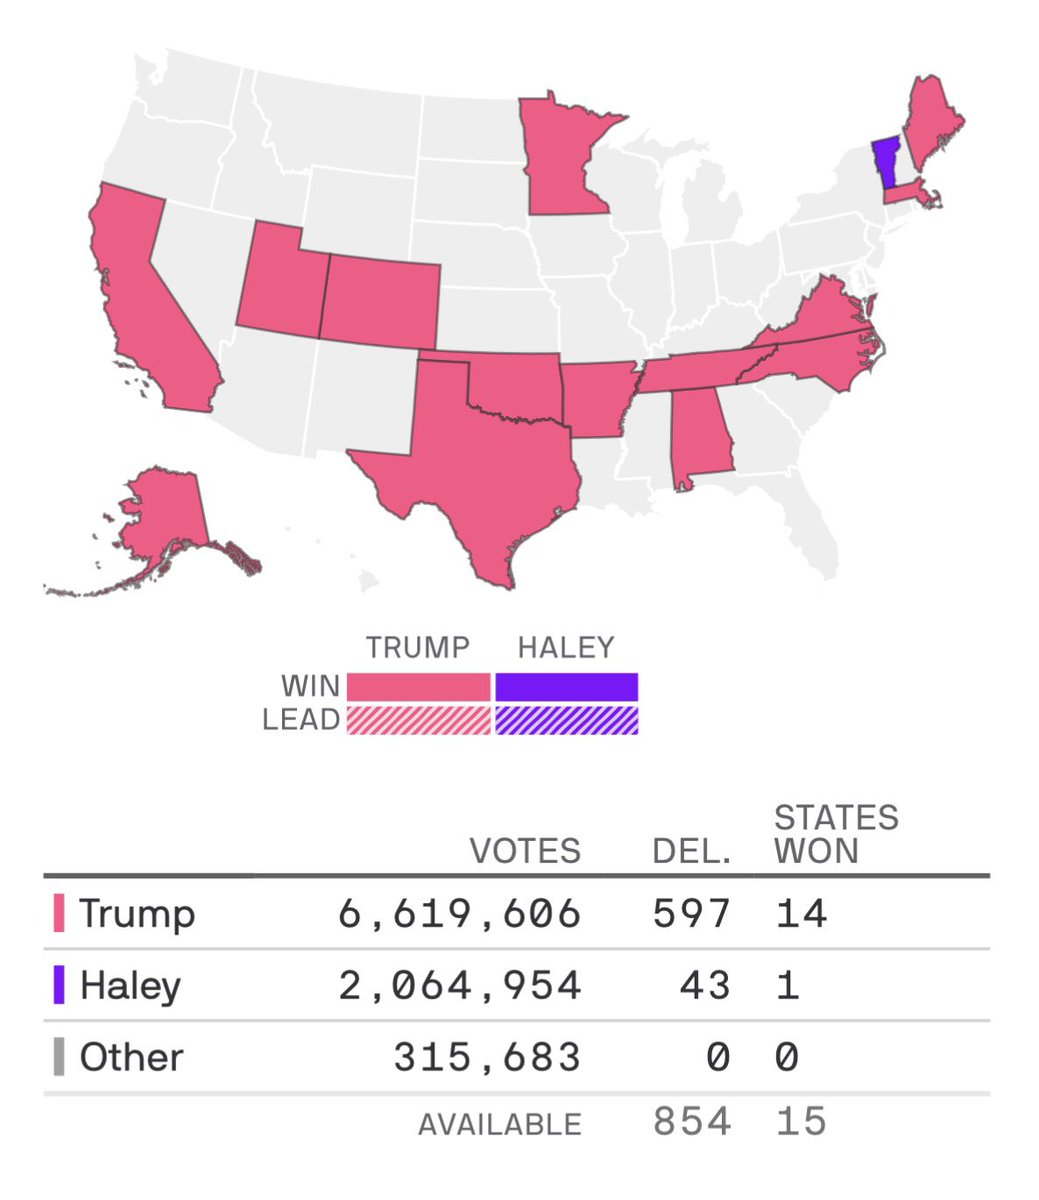 Why Trump might well not win the US presidency? A quarter of all registered Republican voters refused to back him on Super Tuesday, despite knowing he’ll win the nomination anyway. If even half of these refuseniks vote for Biden across all 50 states, Trump will lose in November